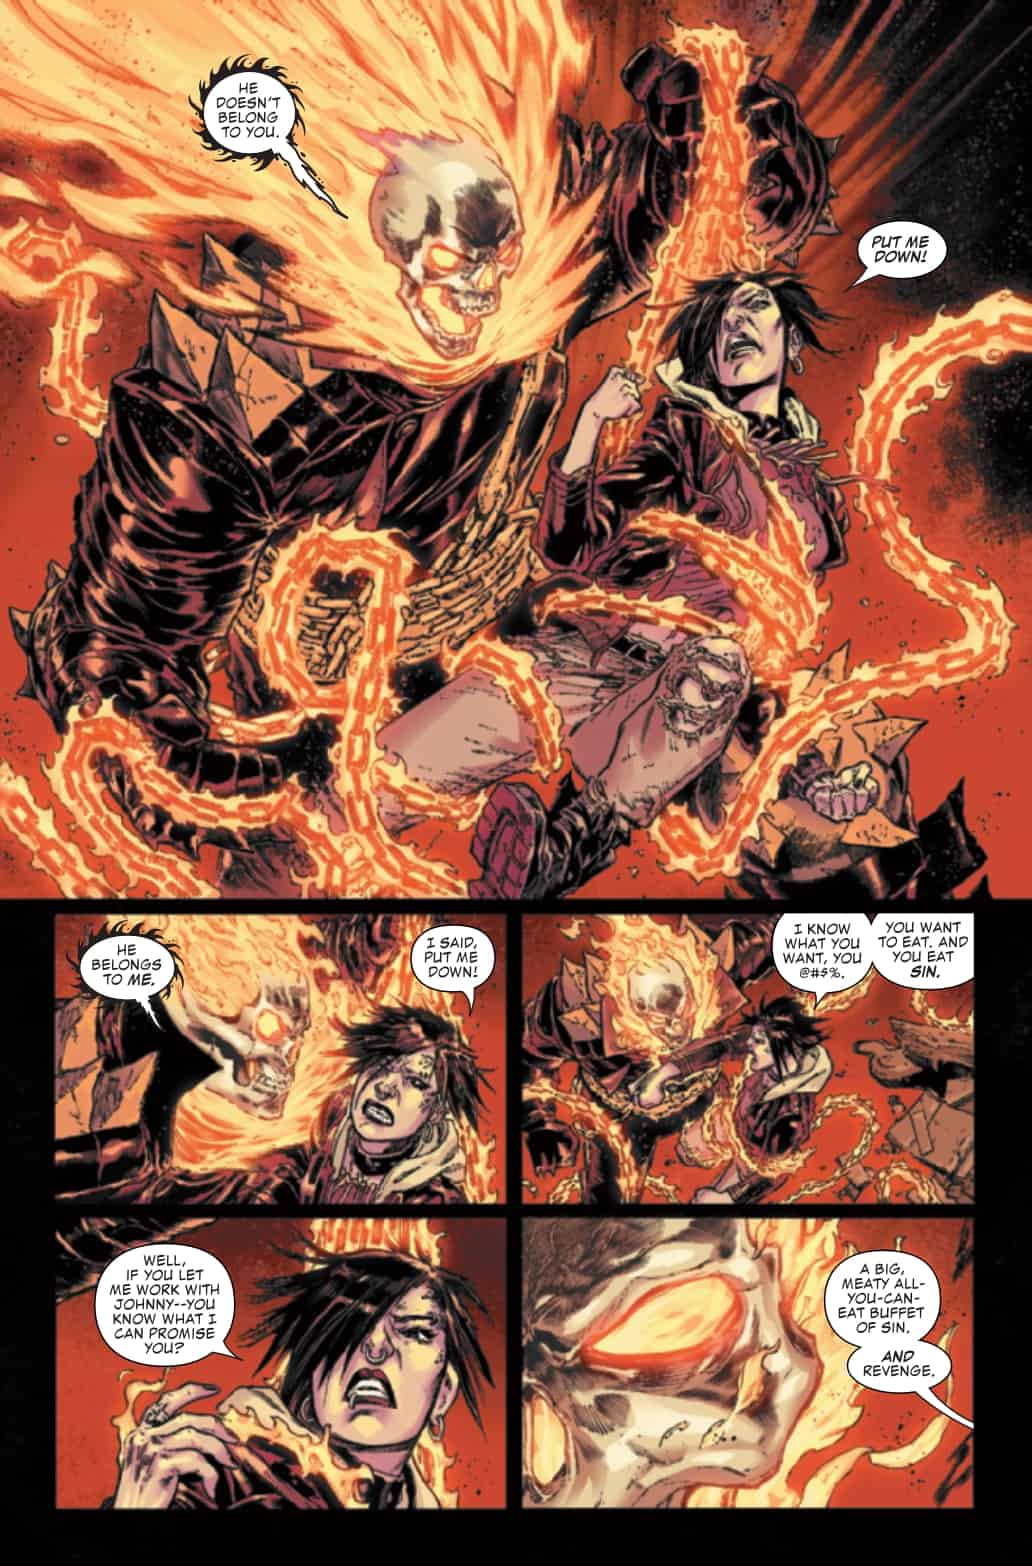 SNEAK PEEK Johnny Blaze Is Pursued By The Creature Known As Exhaust In GHOST RIDER On Sale